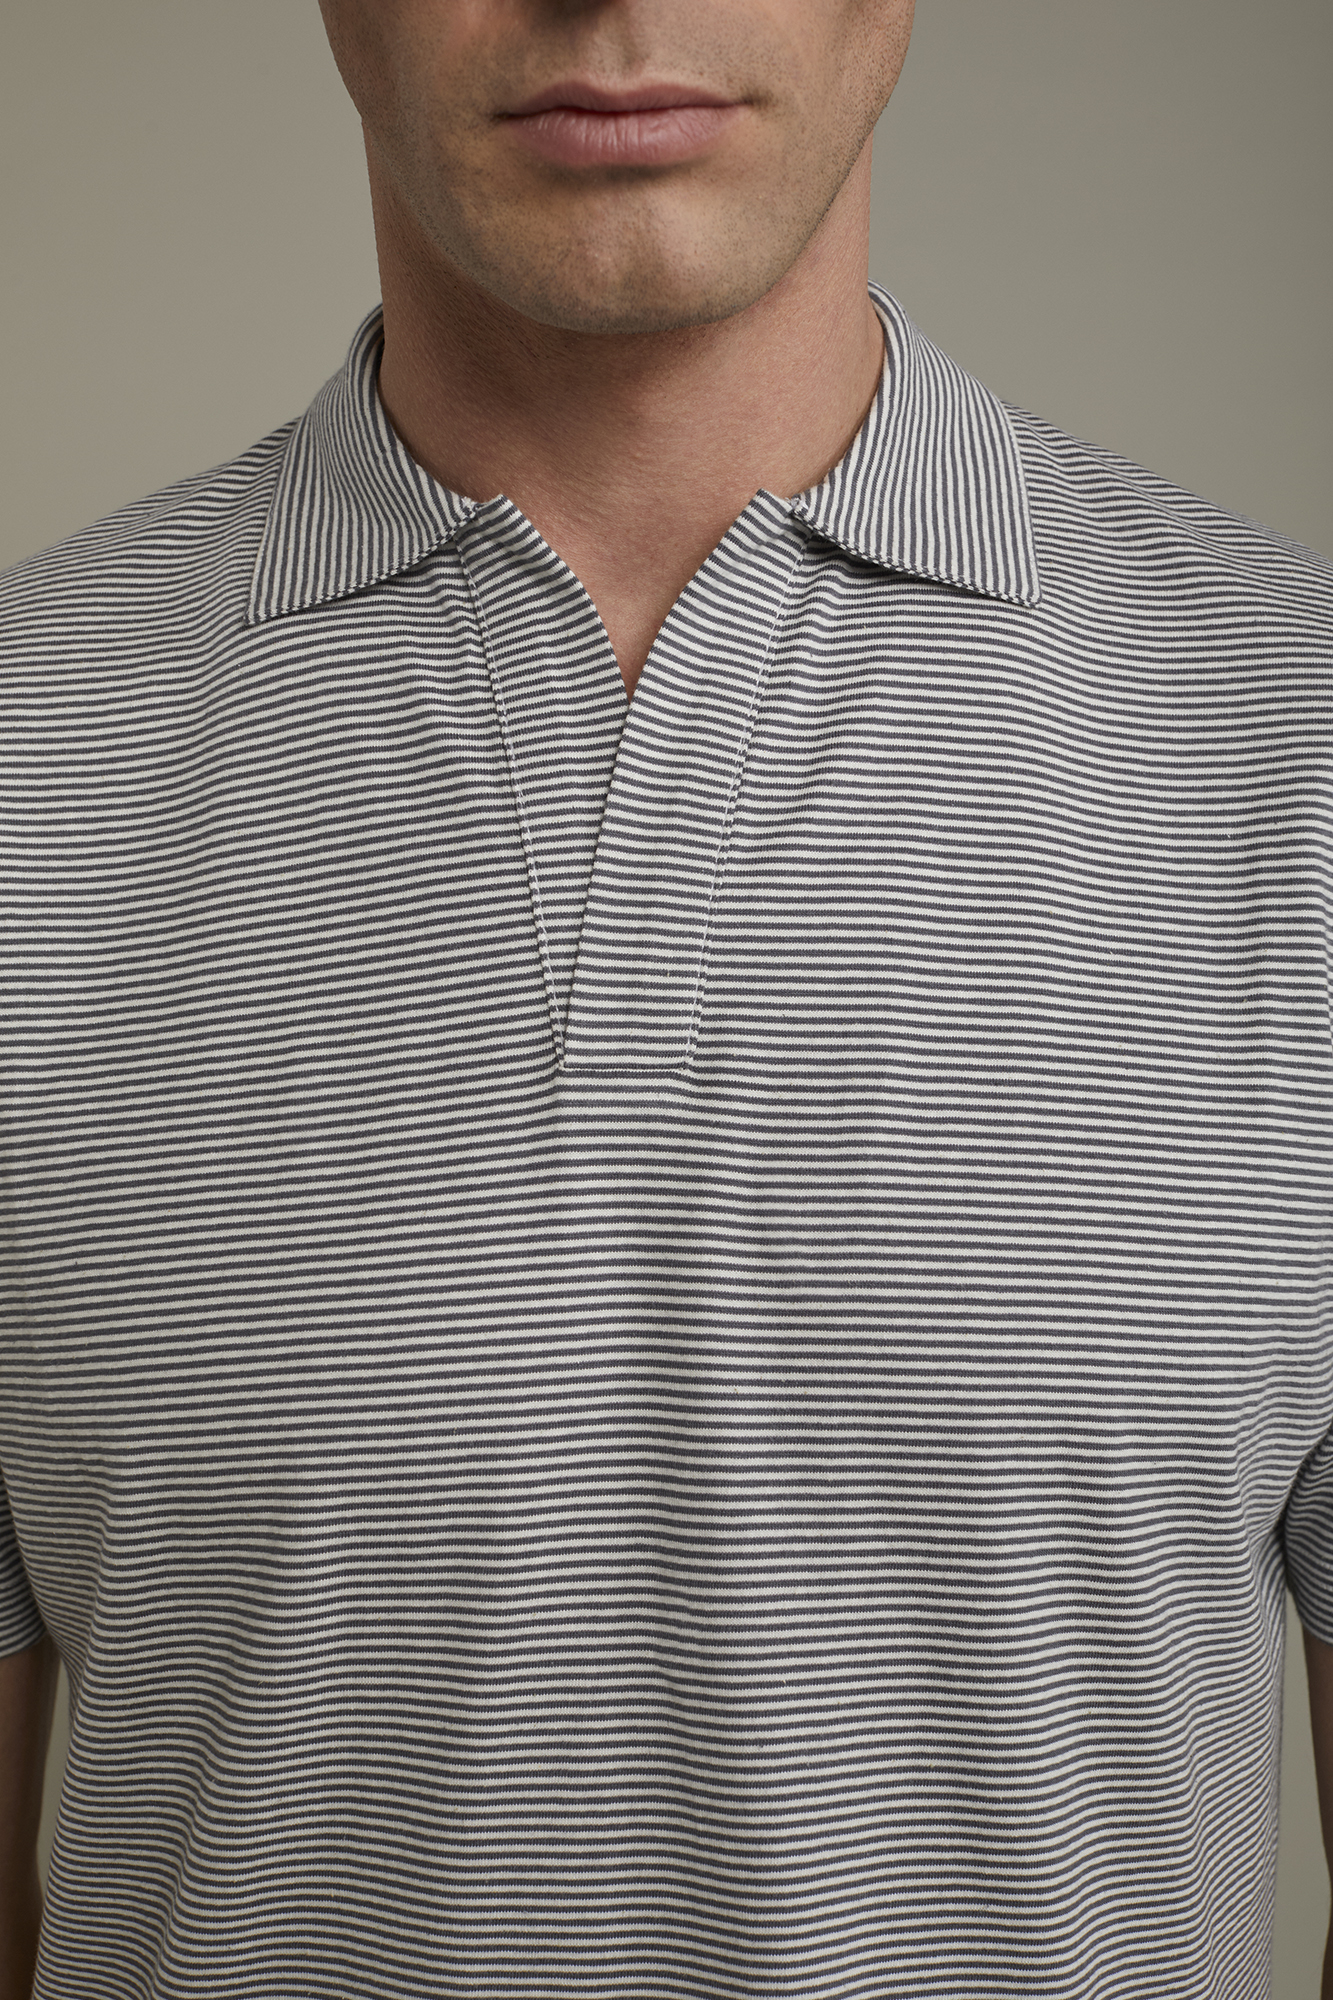 Men’s short sleeve button-less polo shirt with derby collar and thin stripes 100% cotton regular fit image number null